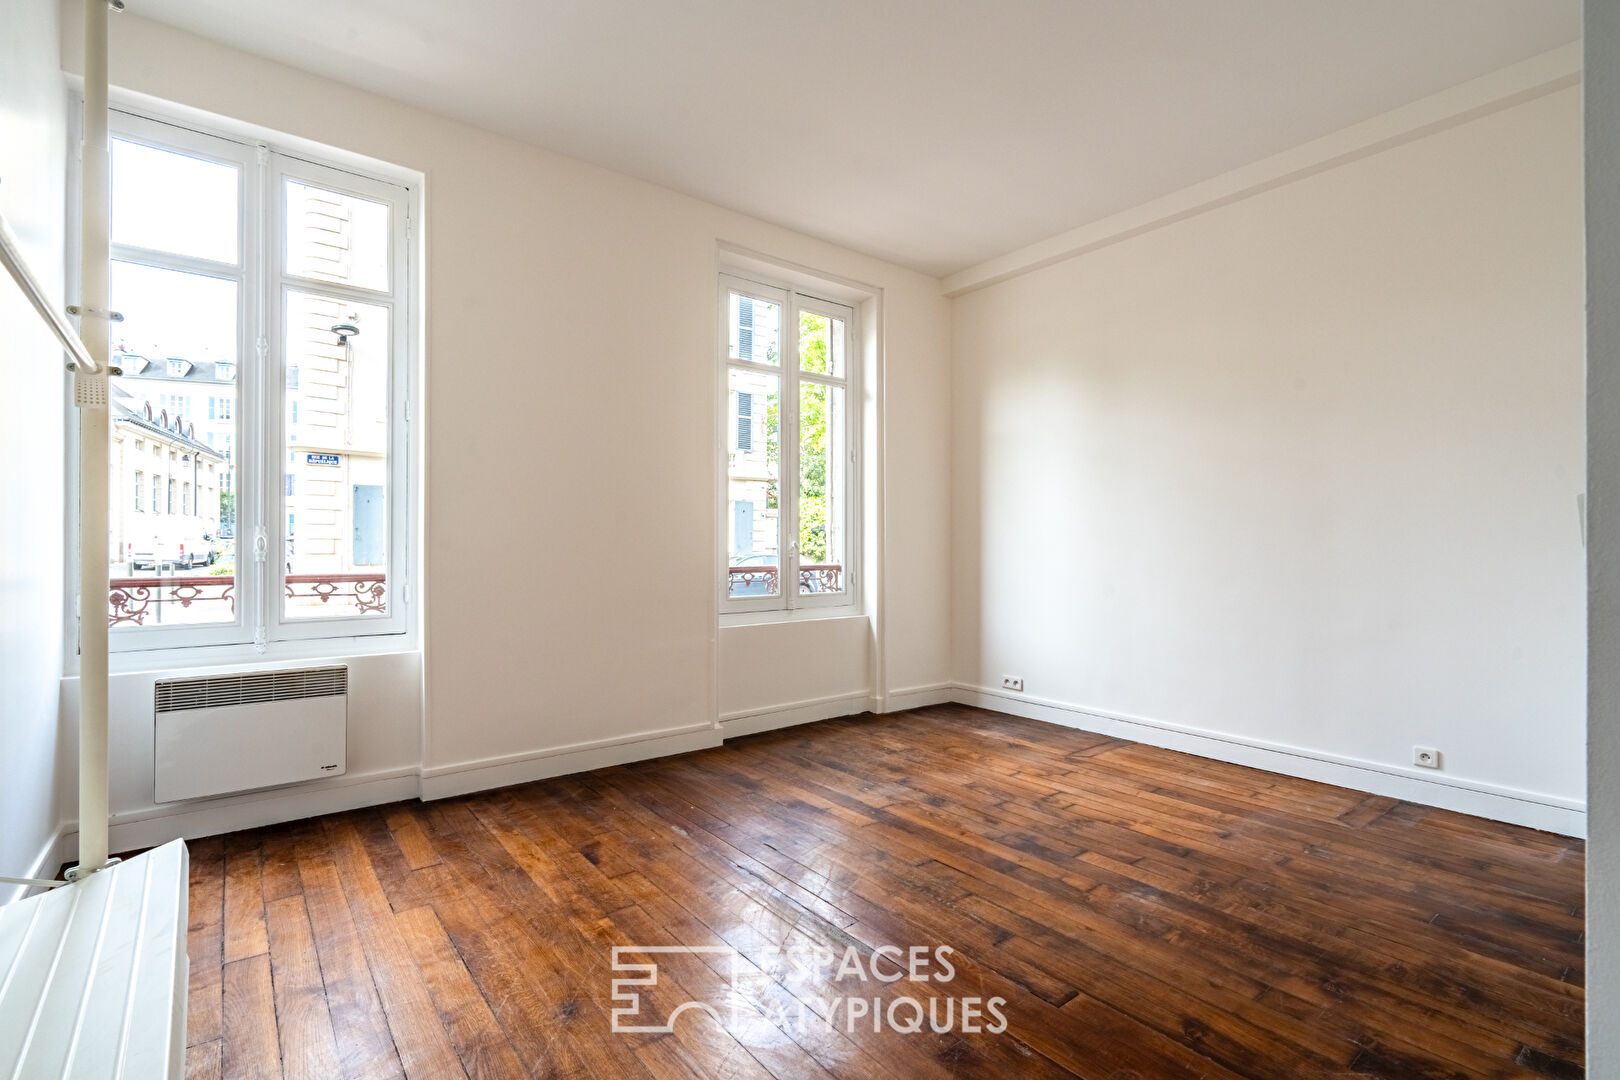 Apartment with terrace and garden in the center of Saint Germain